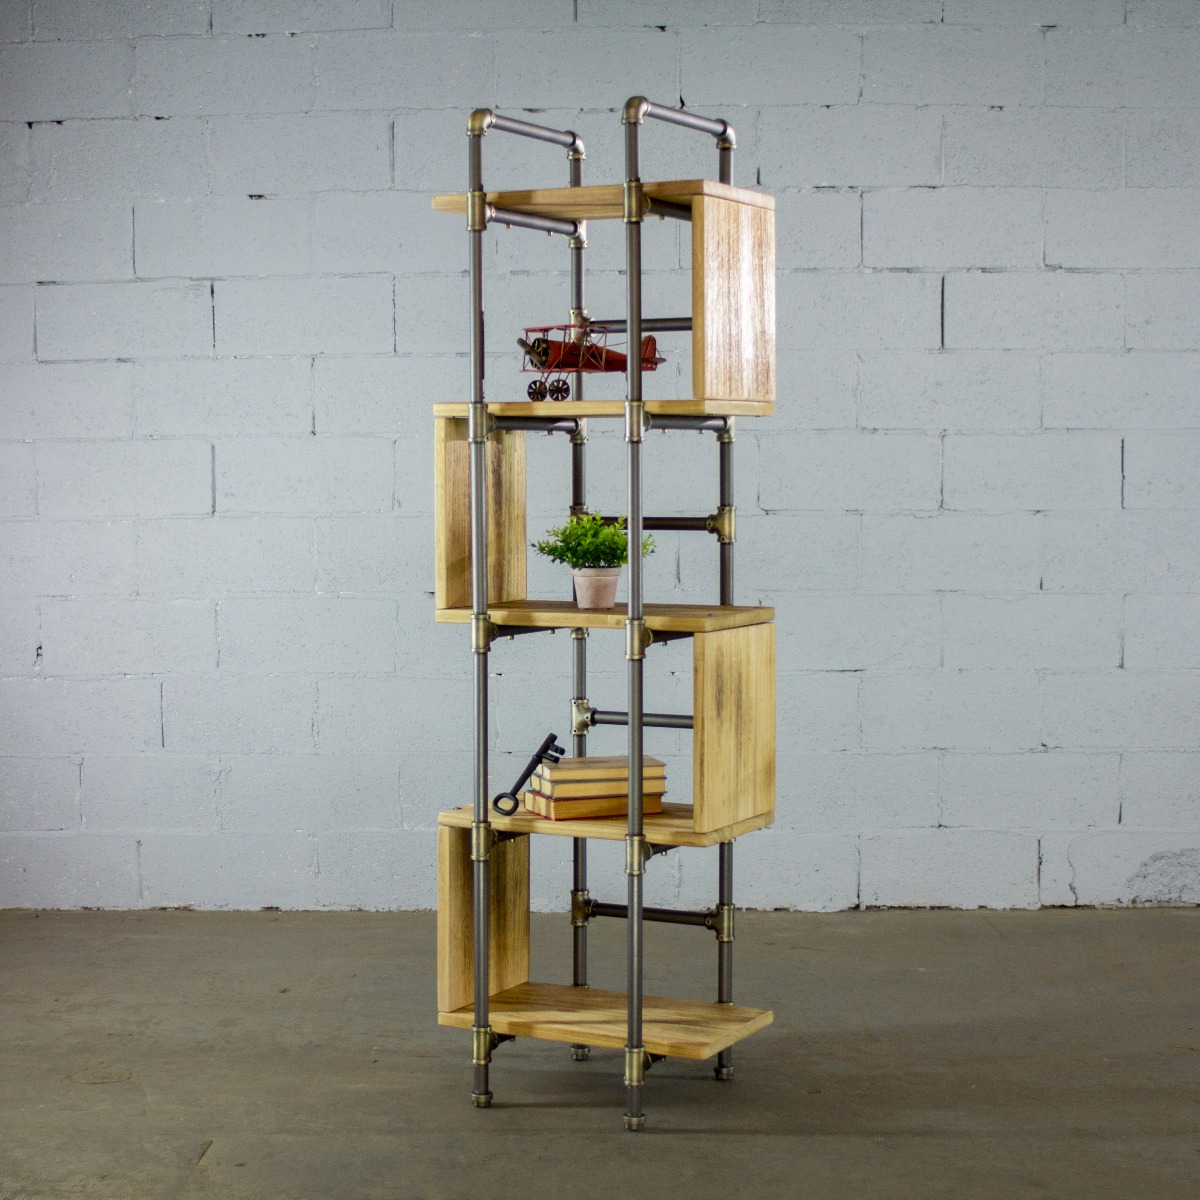 Ow1-br-gr-na Tucson Modern Industrial Etagere Bookcase Display, Brushed Brass Gray Steel Combo With Natural Stained Wood